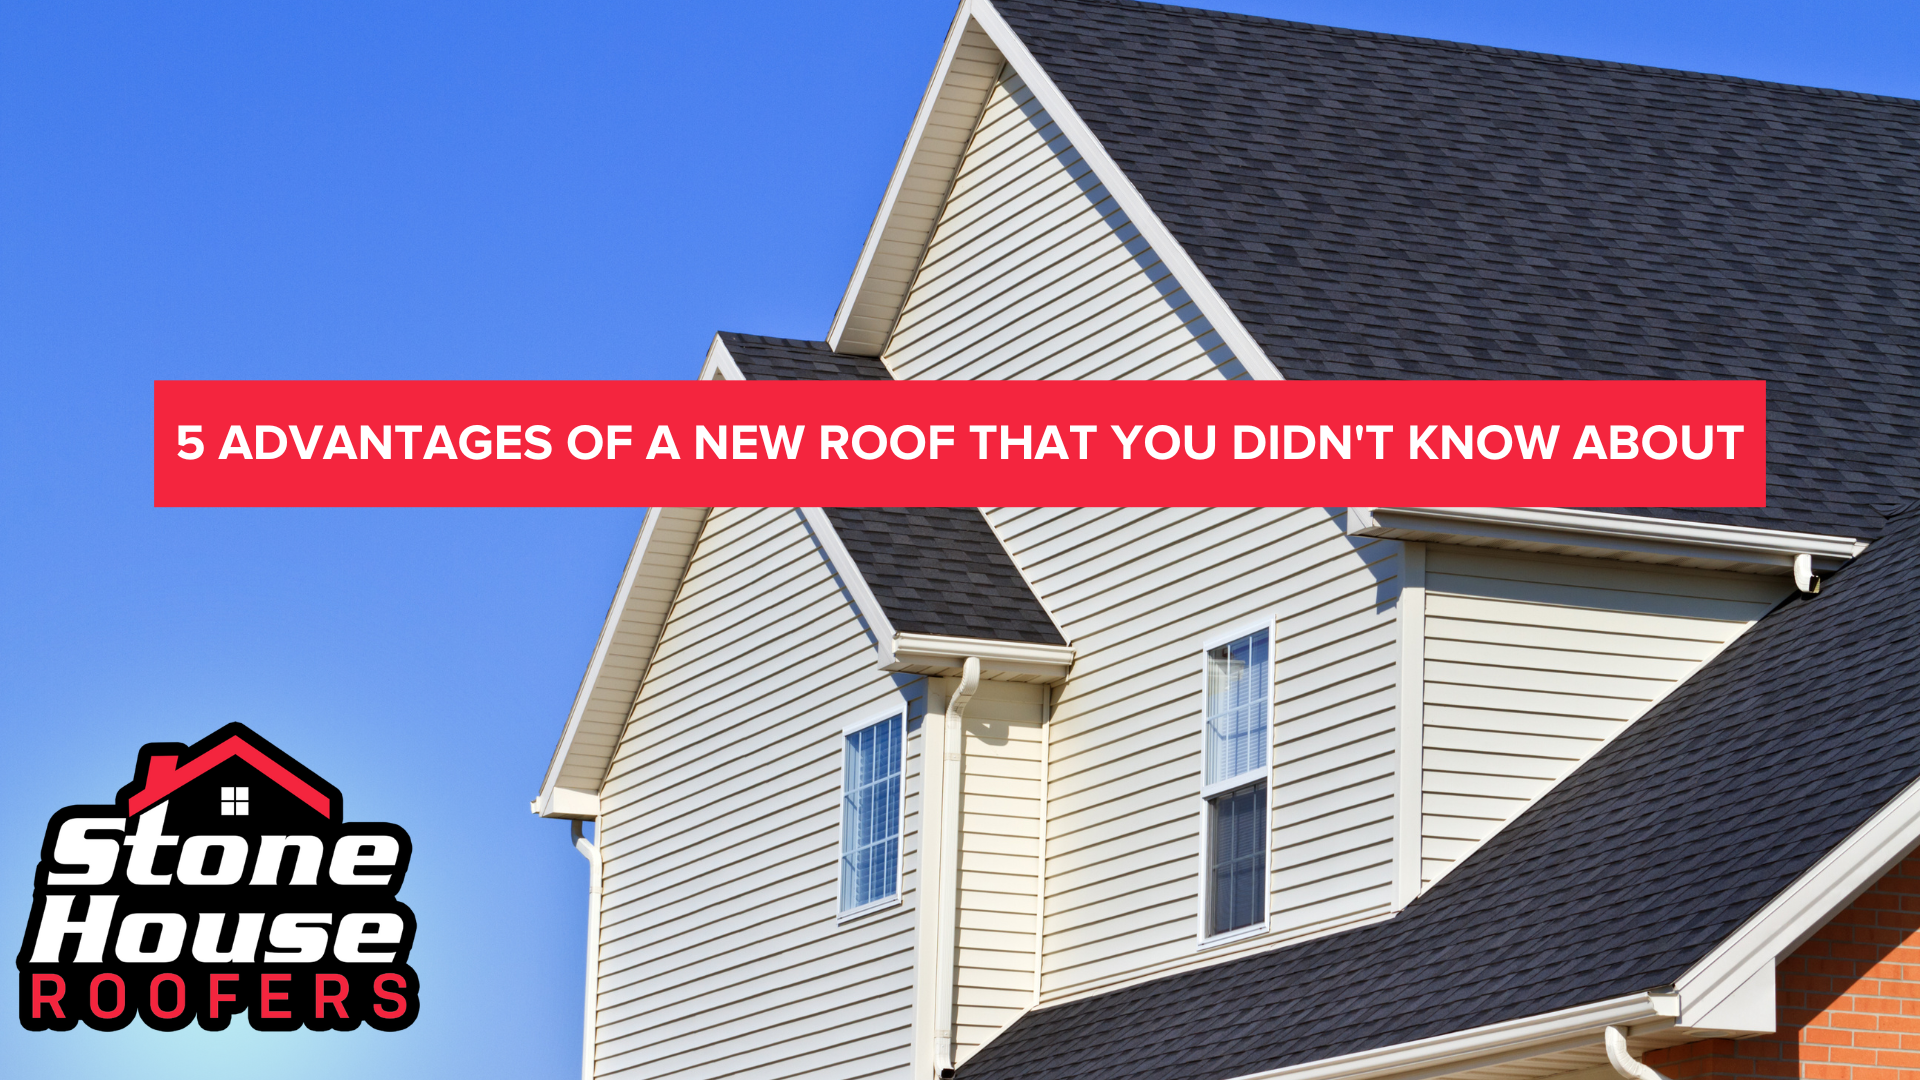 5 Advantages Of A New Roof That You Didn’t Know About